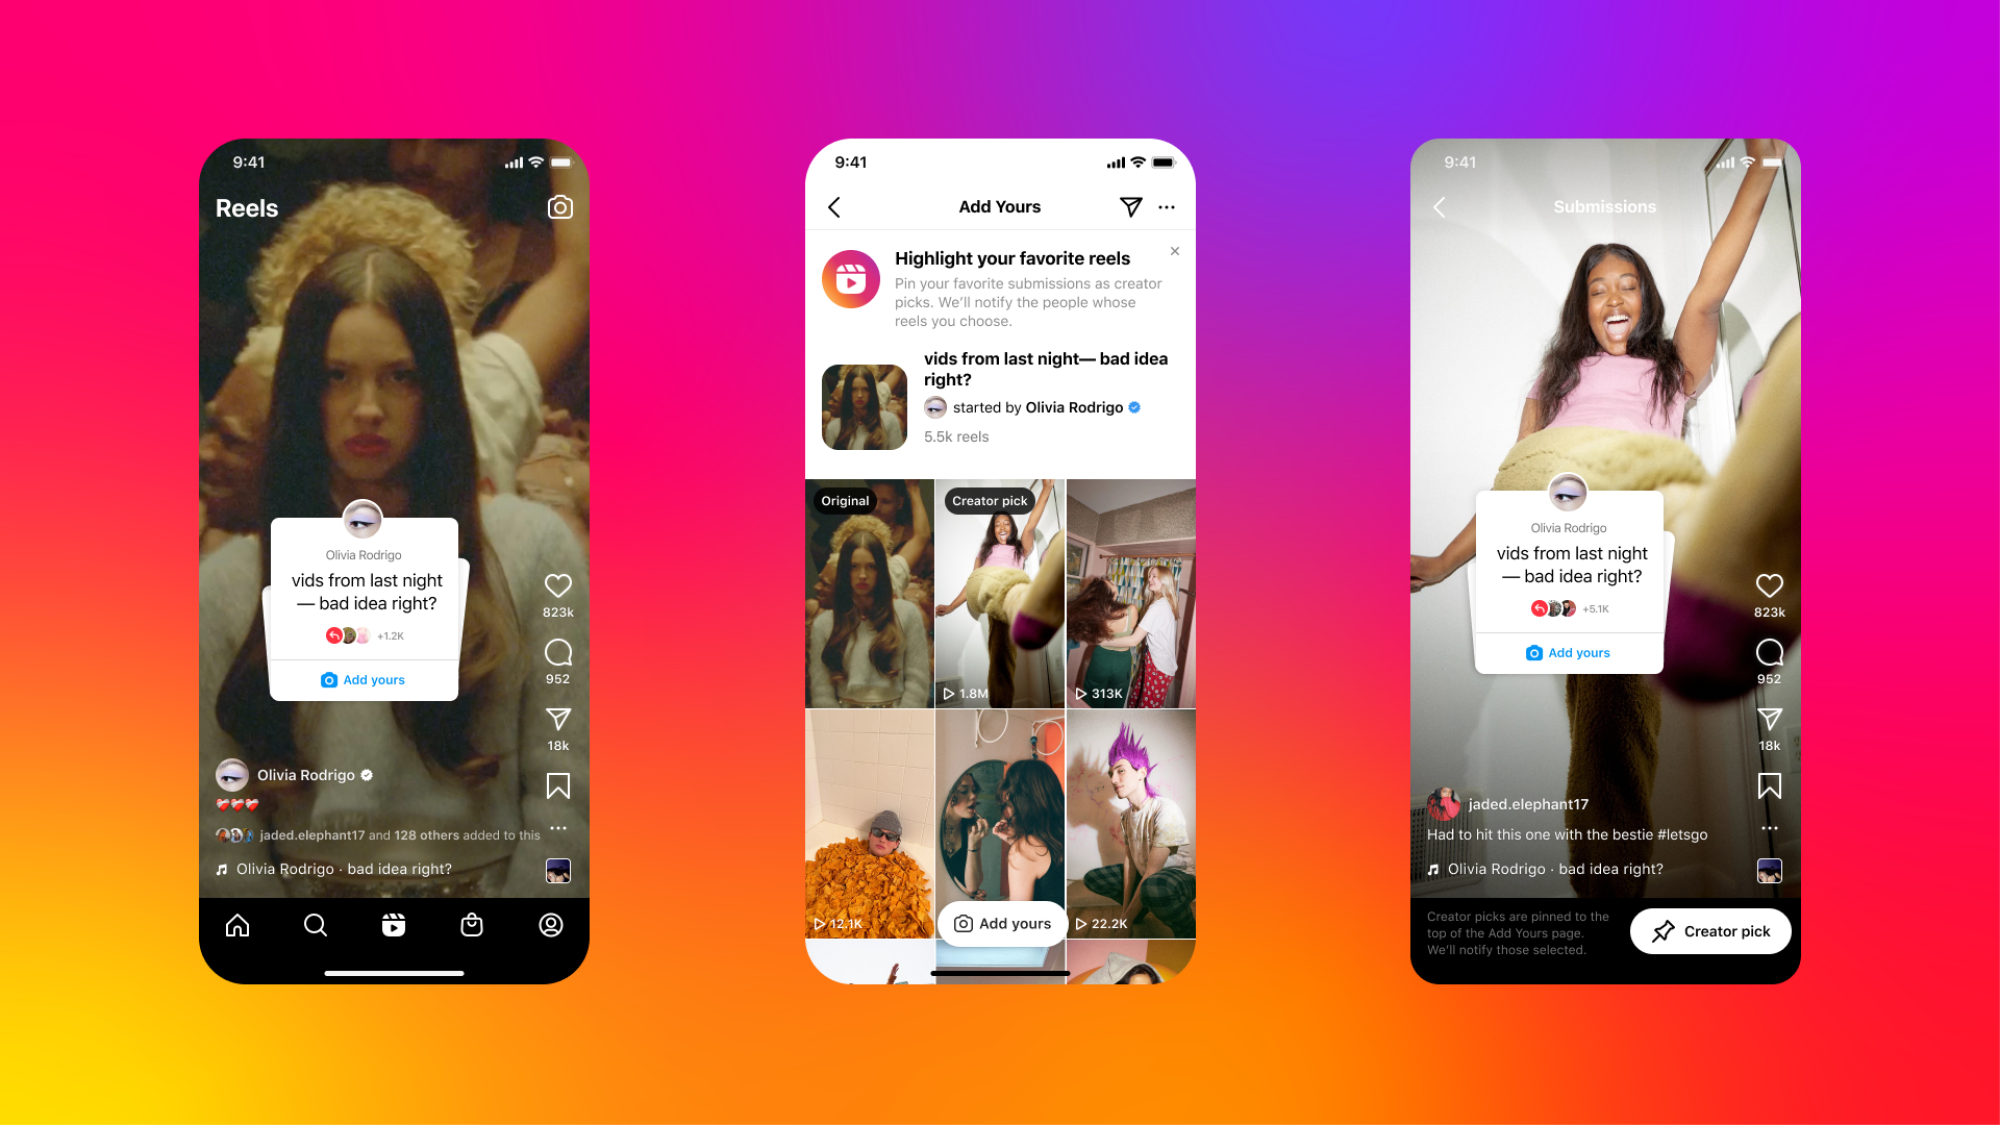 Screenshots showing Instagram's new pinned Add Yours responses.